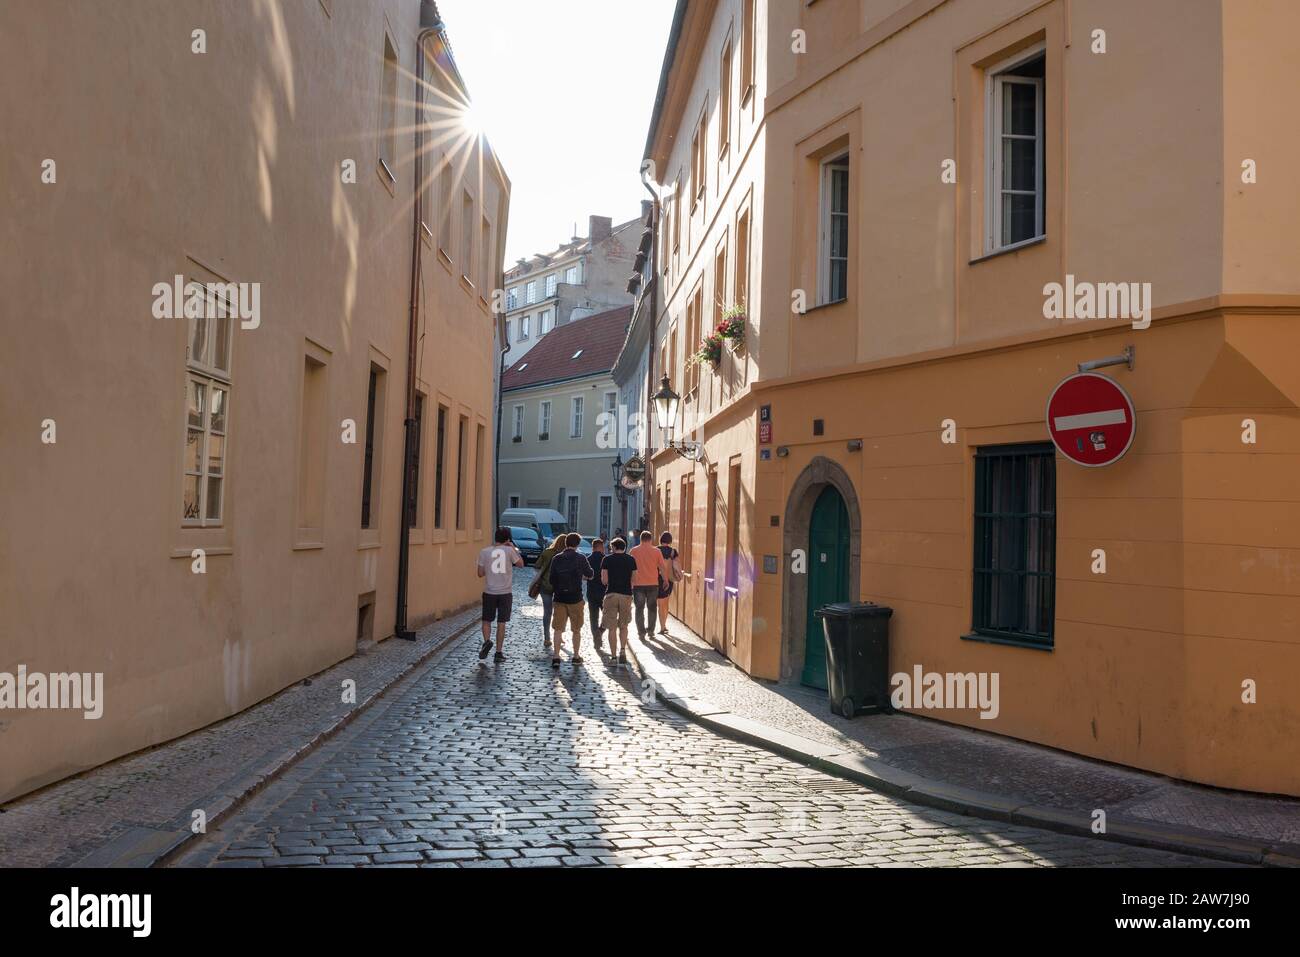 Prague, Czech Republic - May 22, 2018: Group of young people walking the streets of Prague Stock Photo